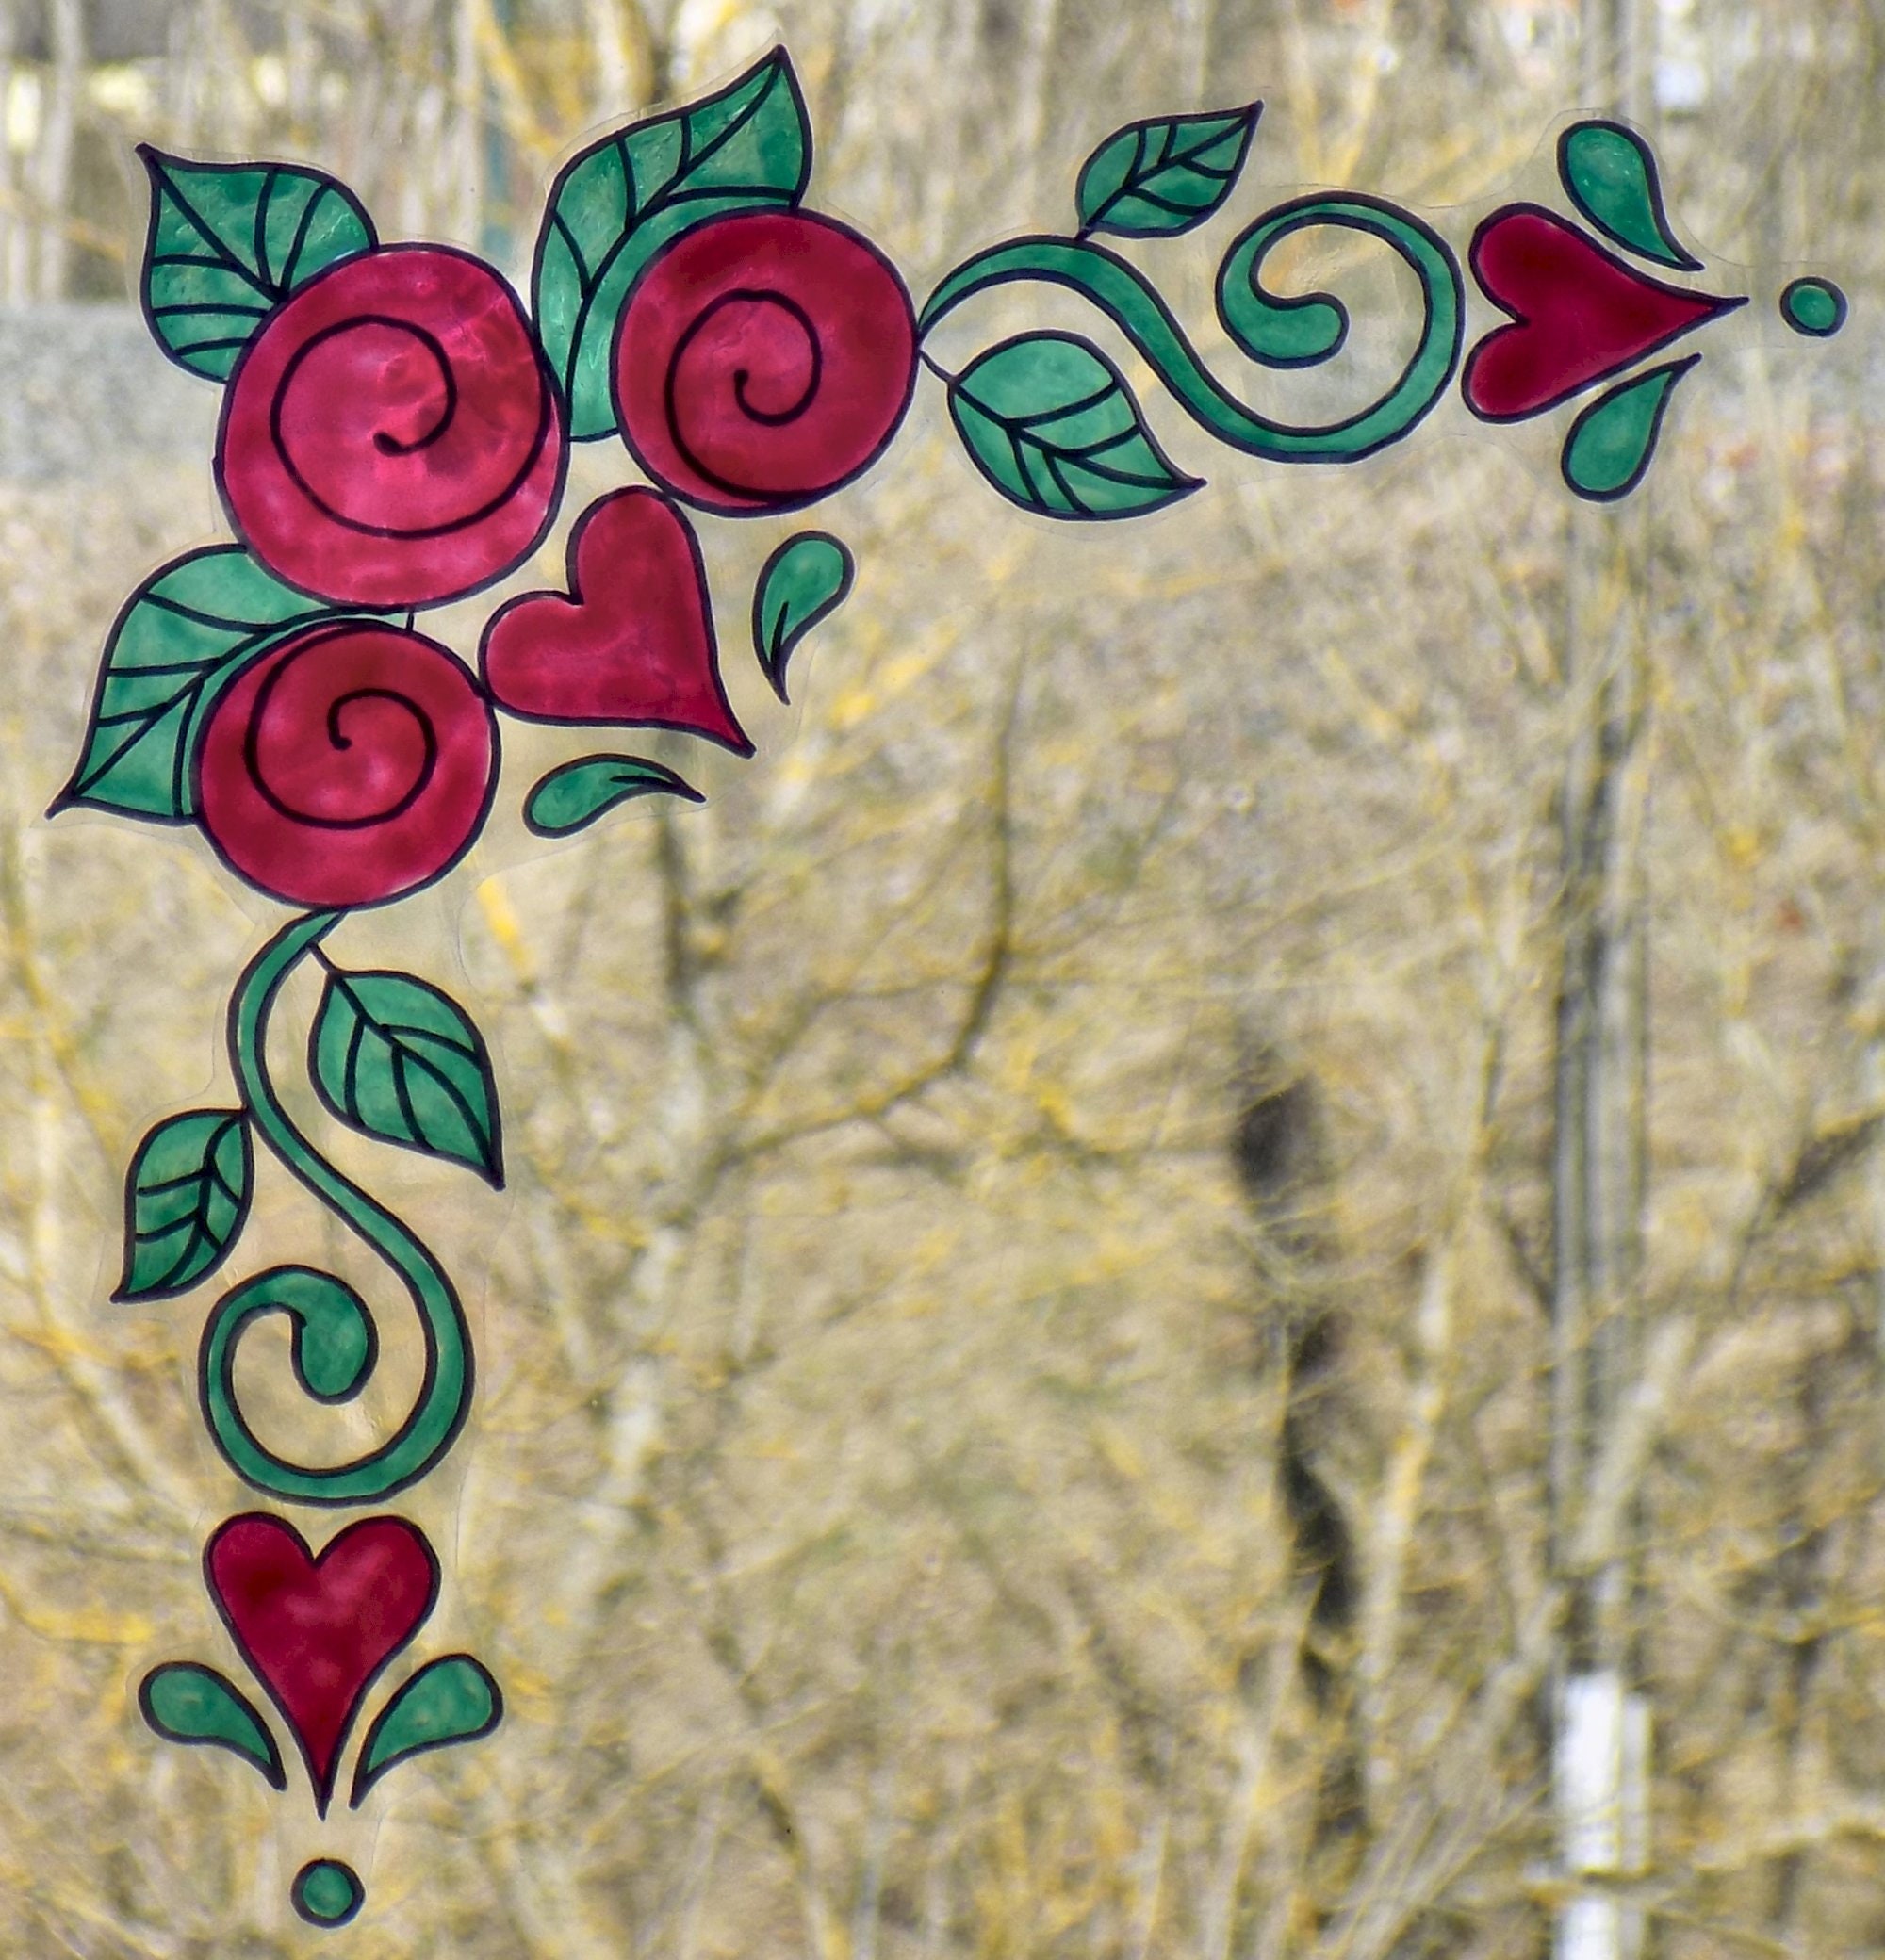 Wicoart Sticker Window Cling Stained Glass Vitrail Decal Angle Roses et Coeurs 20x20 cm